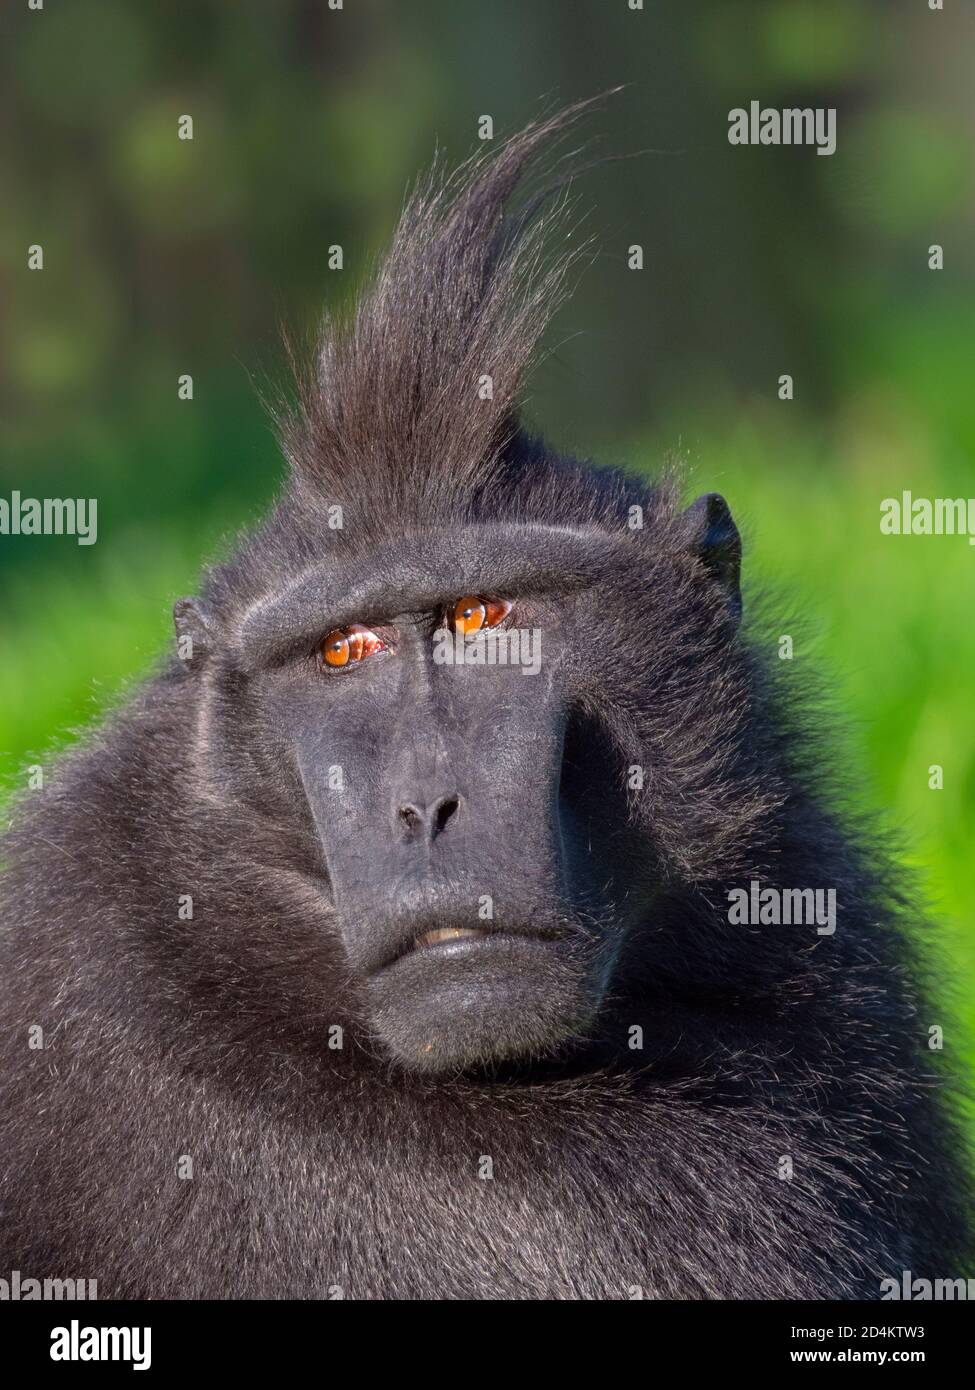 Celebes crested macaque Macaca nigra also known as the crested black macaque, Sulawesi crested macaque, or the black ape Stock Photo